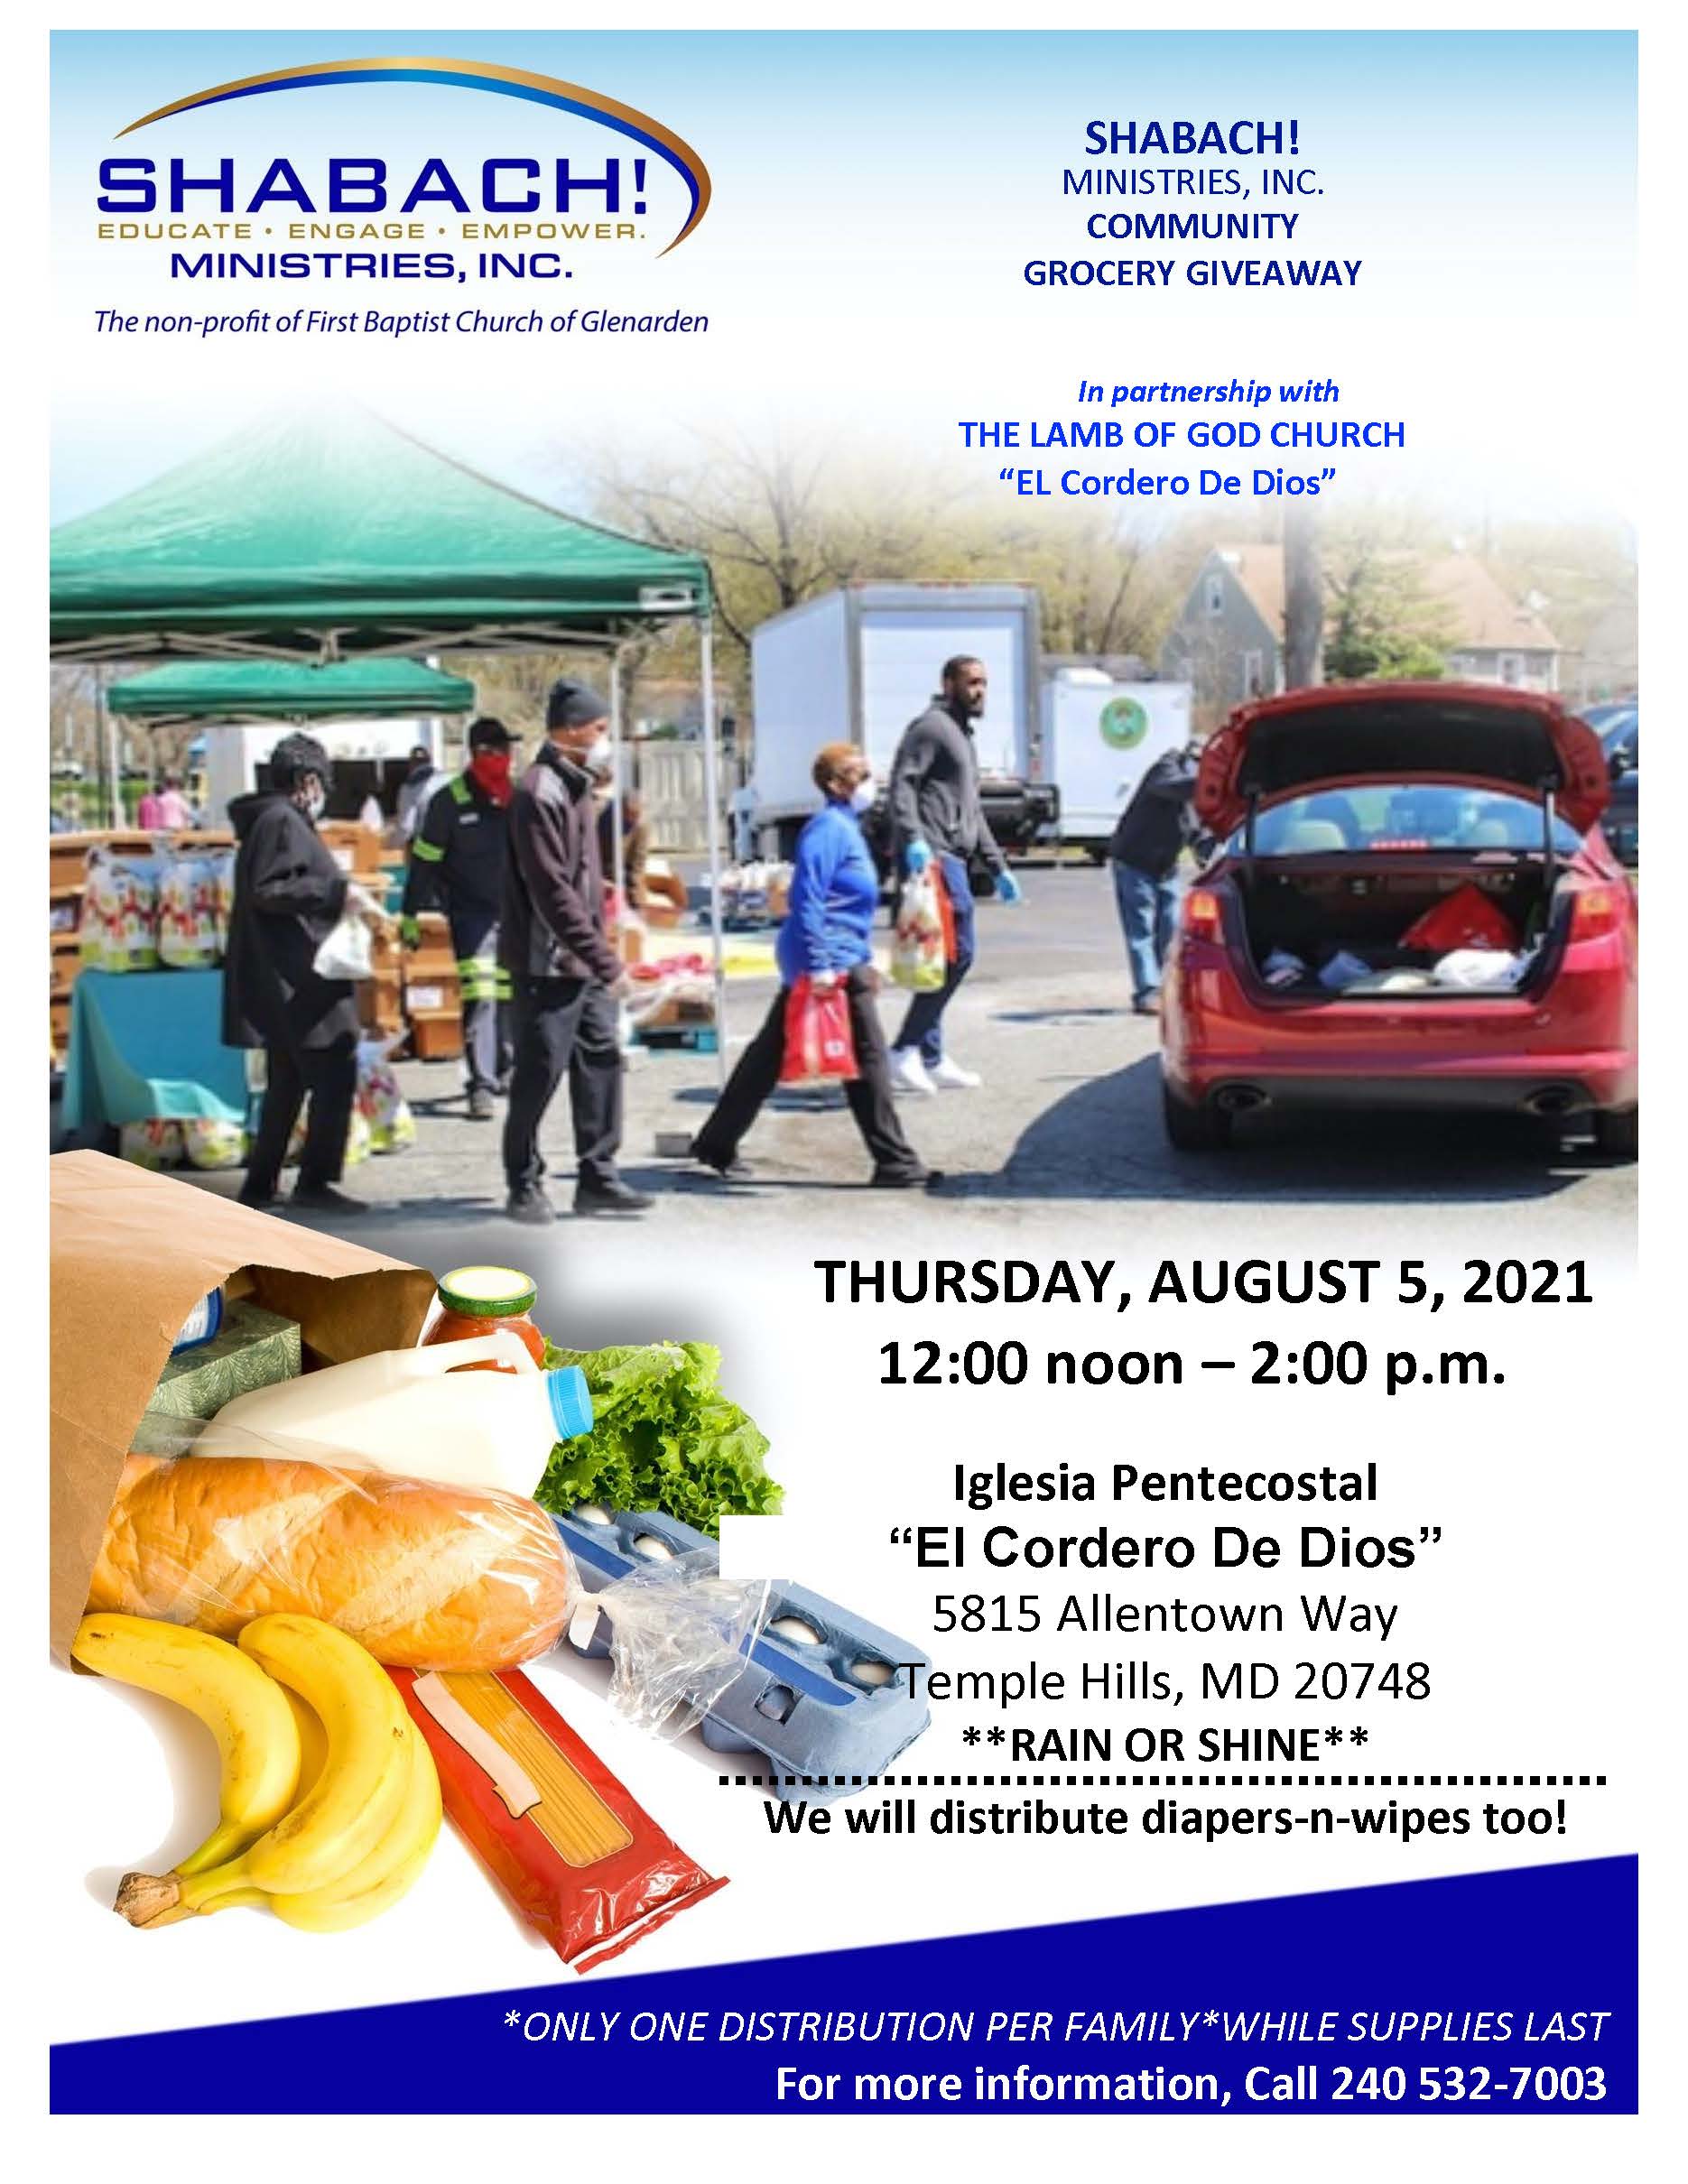 Shabach-Ministries_Flyer-for-the-August-5-2021-Grocery-Giveaway